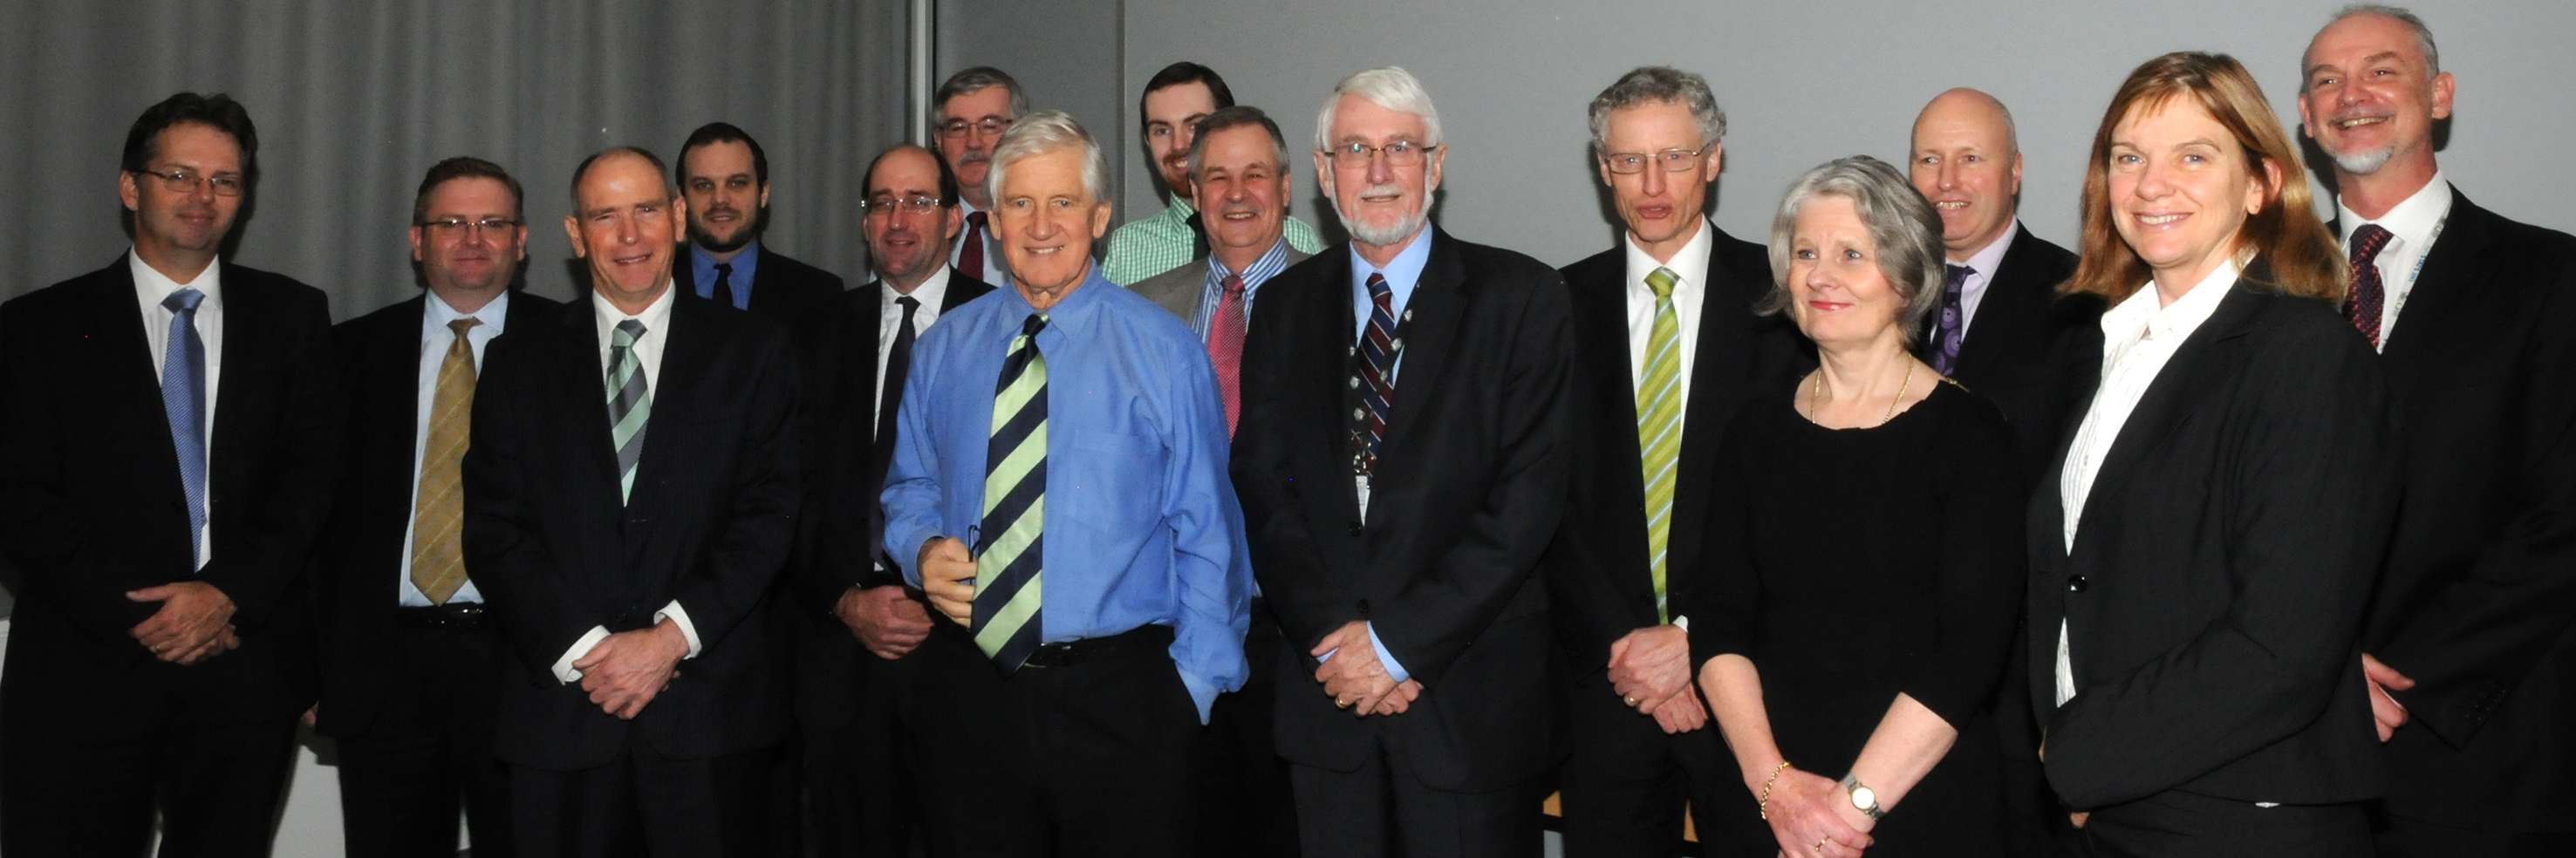 The Australian Statistics Advisory Council meeting in Canberra on 18 June 2013